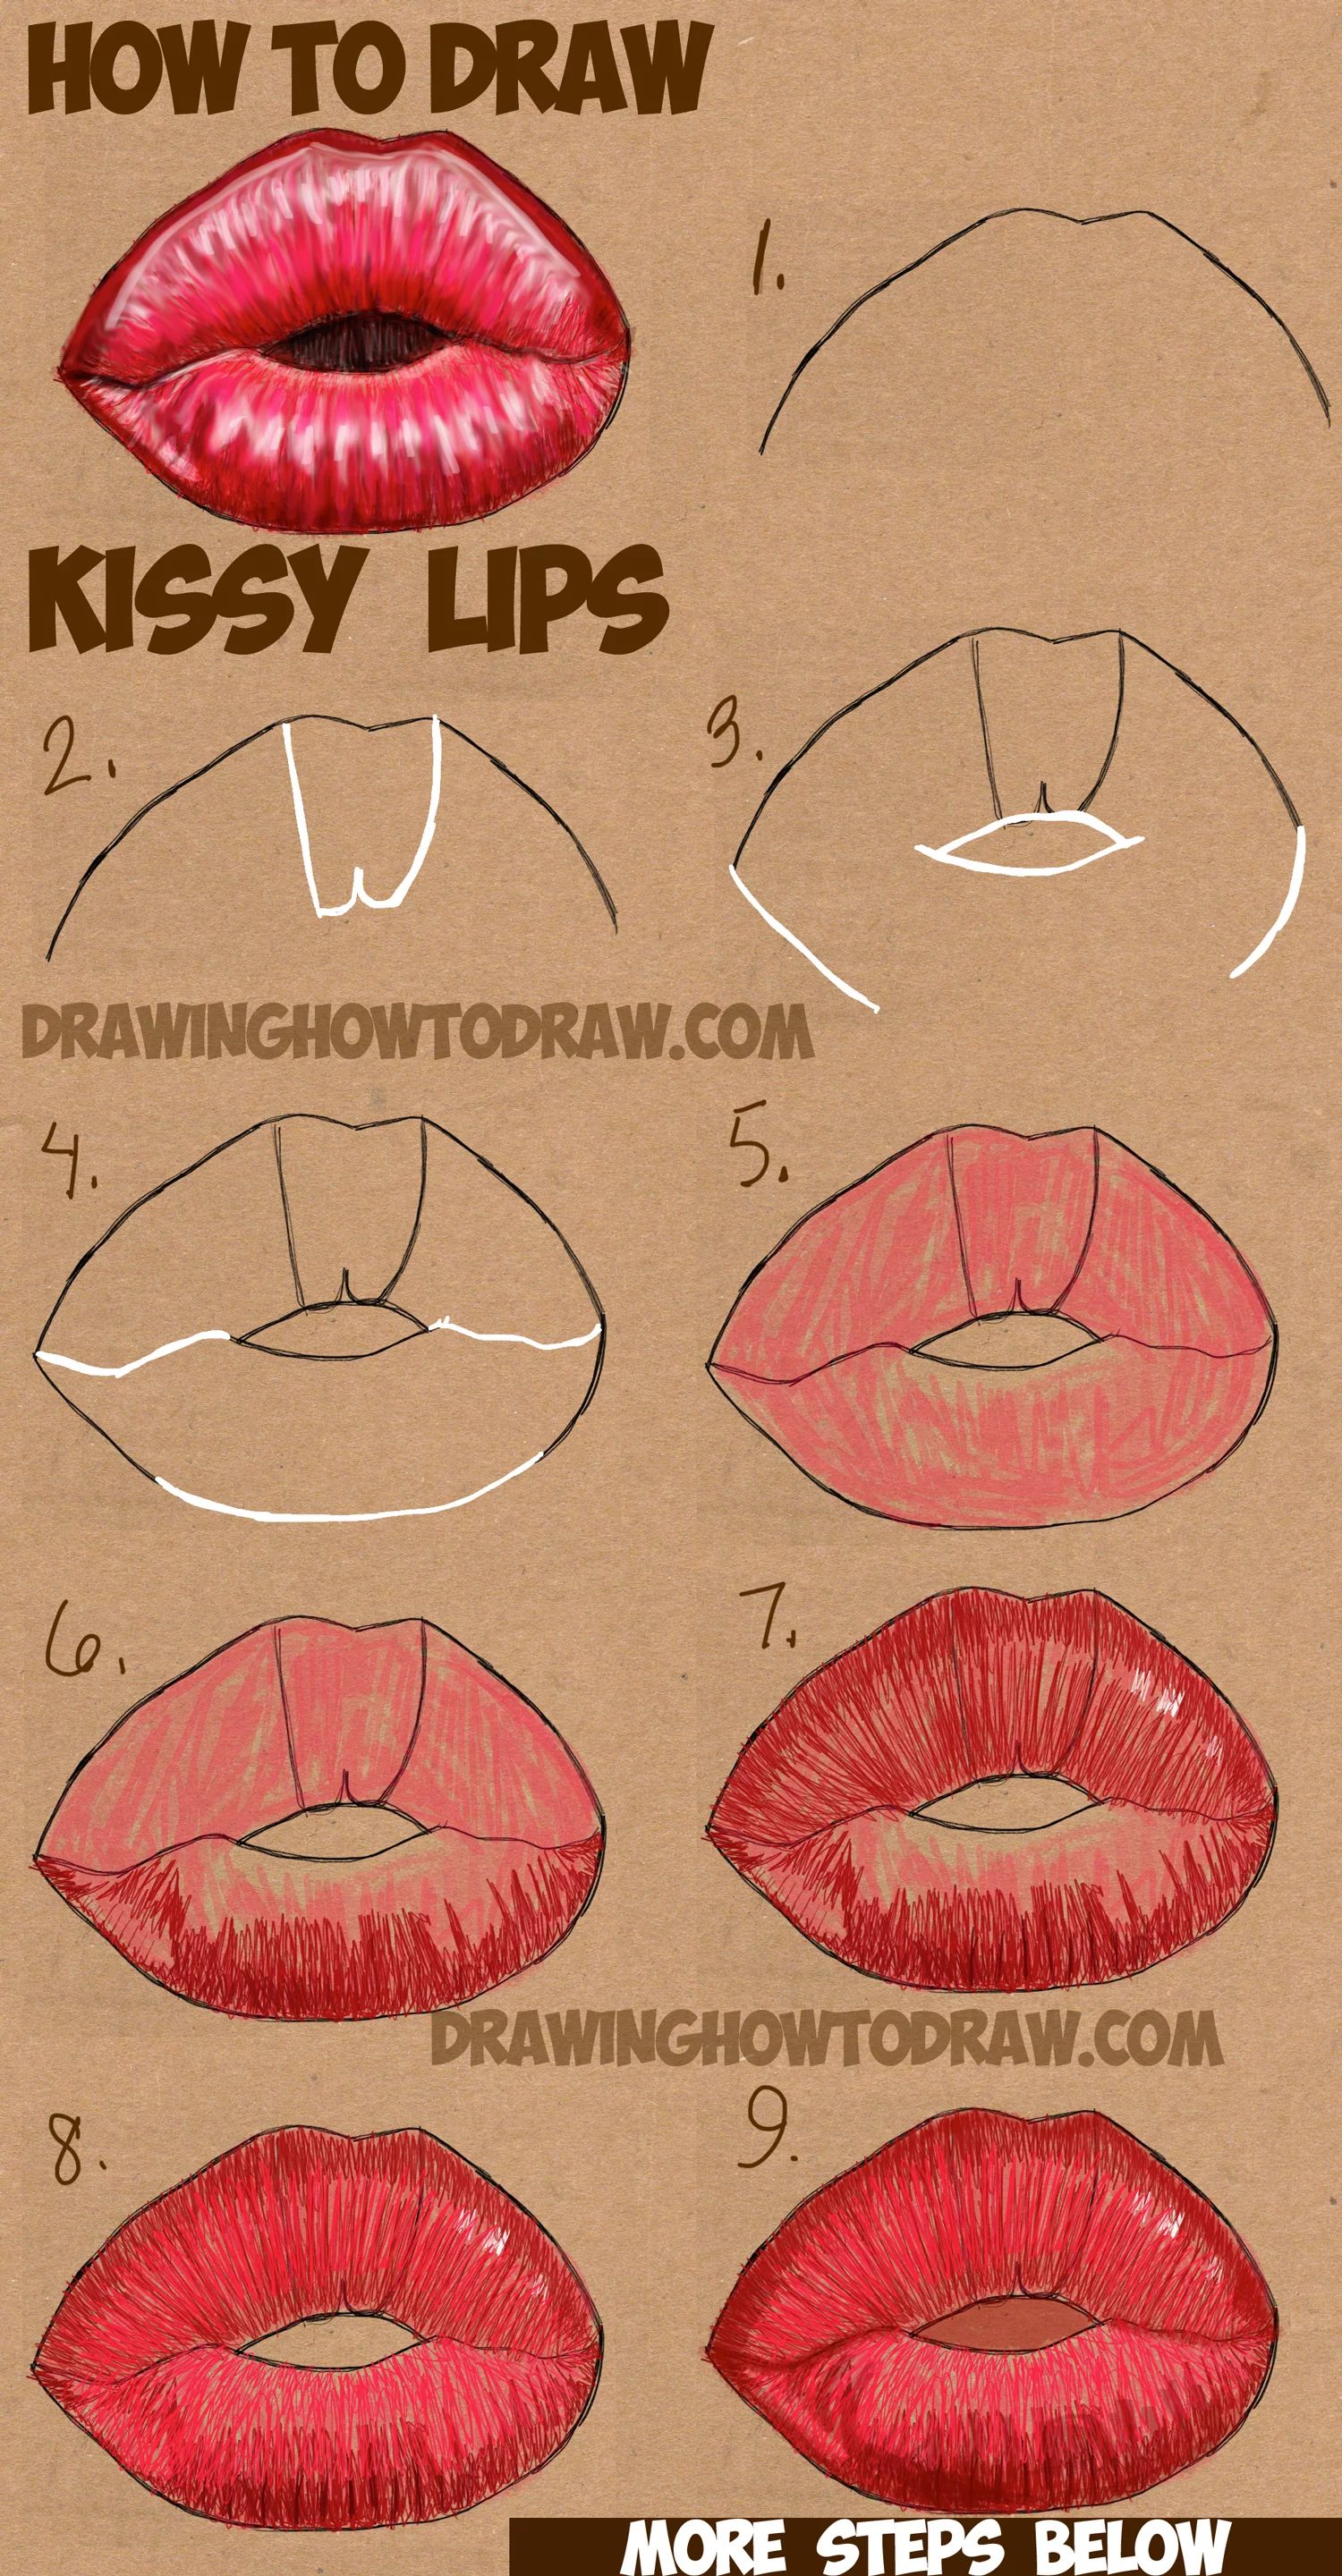 How To Draw Kissy Kissing Puckering Sexy Lips How To Draw Step By Step Drawing Tutorials Learn how to draw fruit simply by following the steps outlined in our video lessons. how to draw kissy kissing puckering